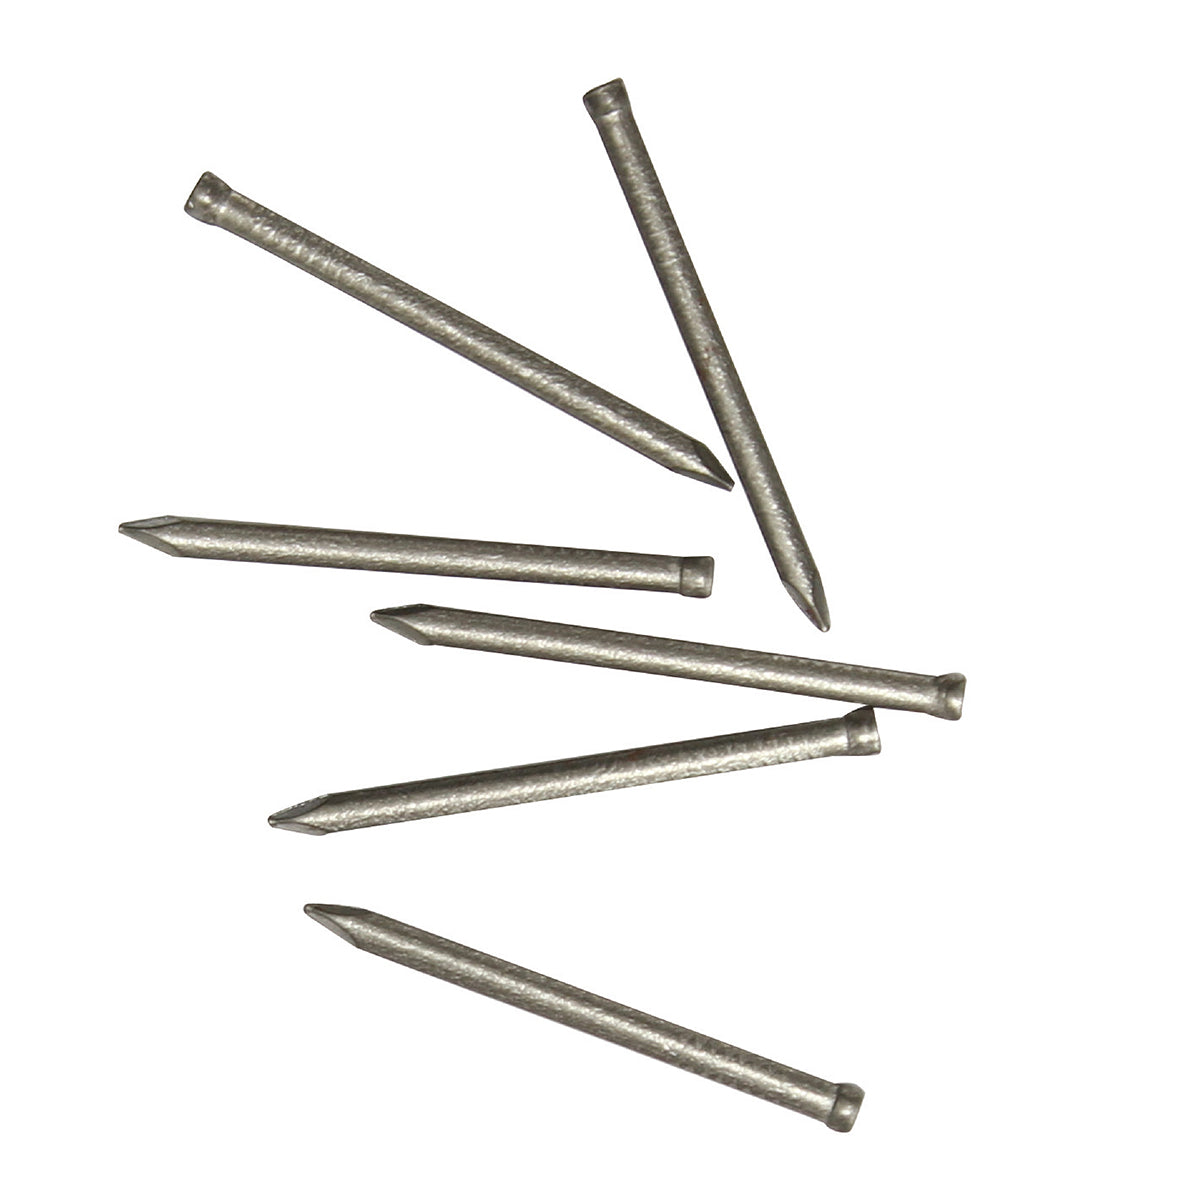 Oval Head Nails 40mm